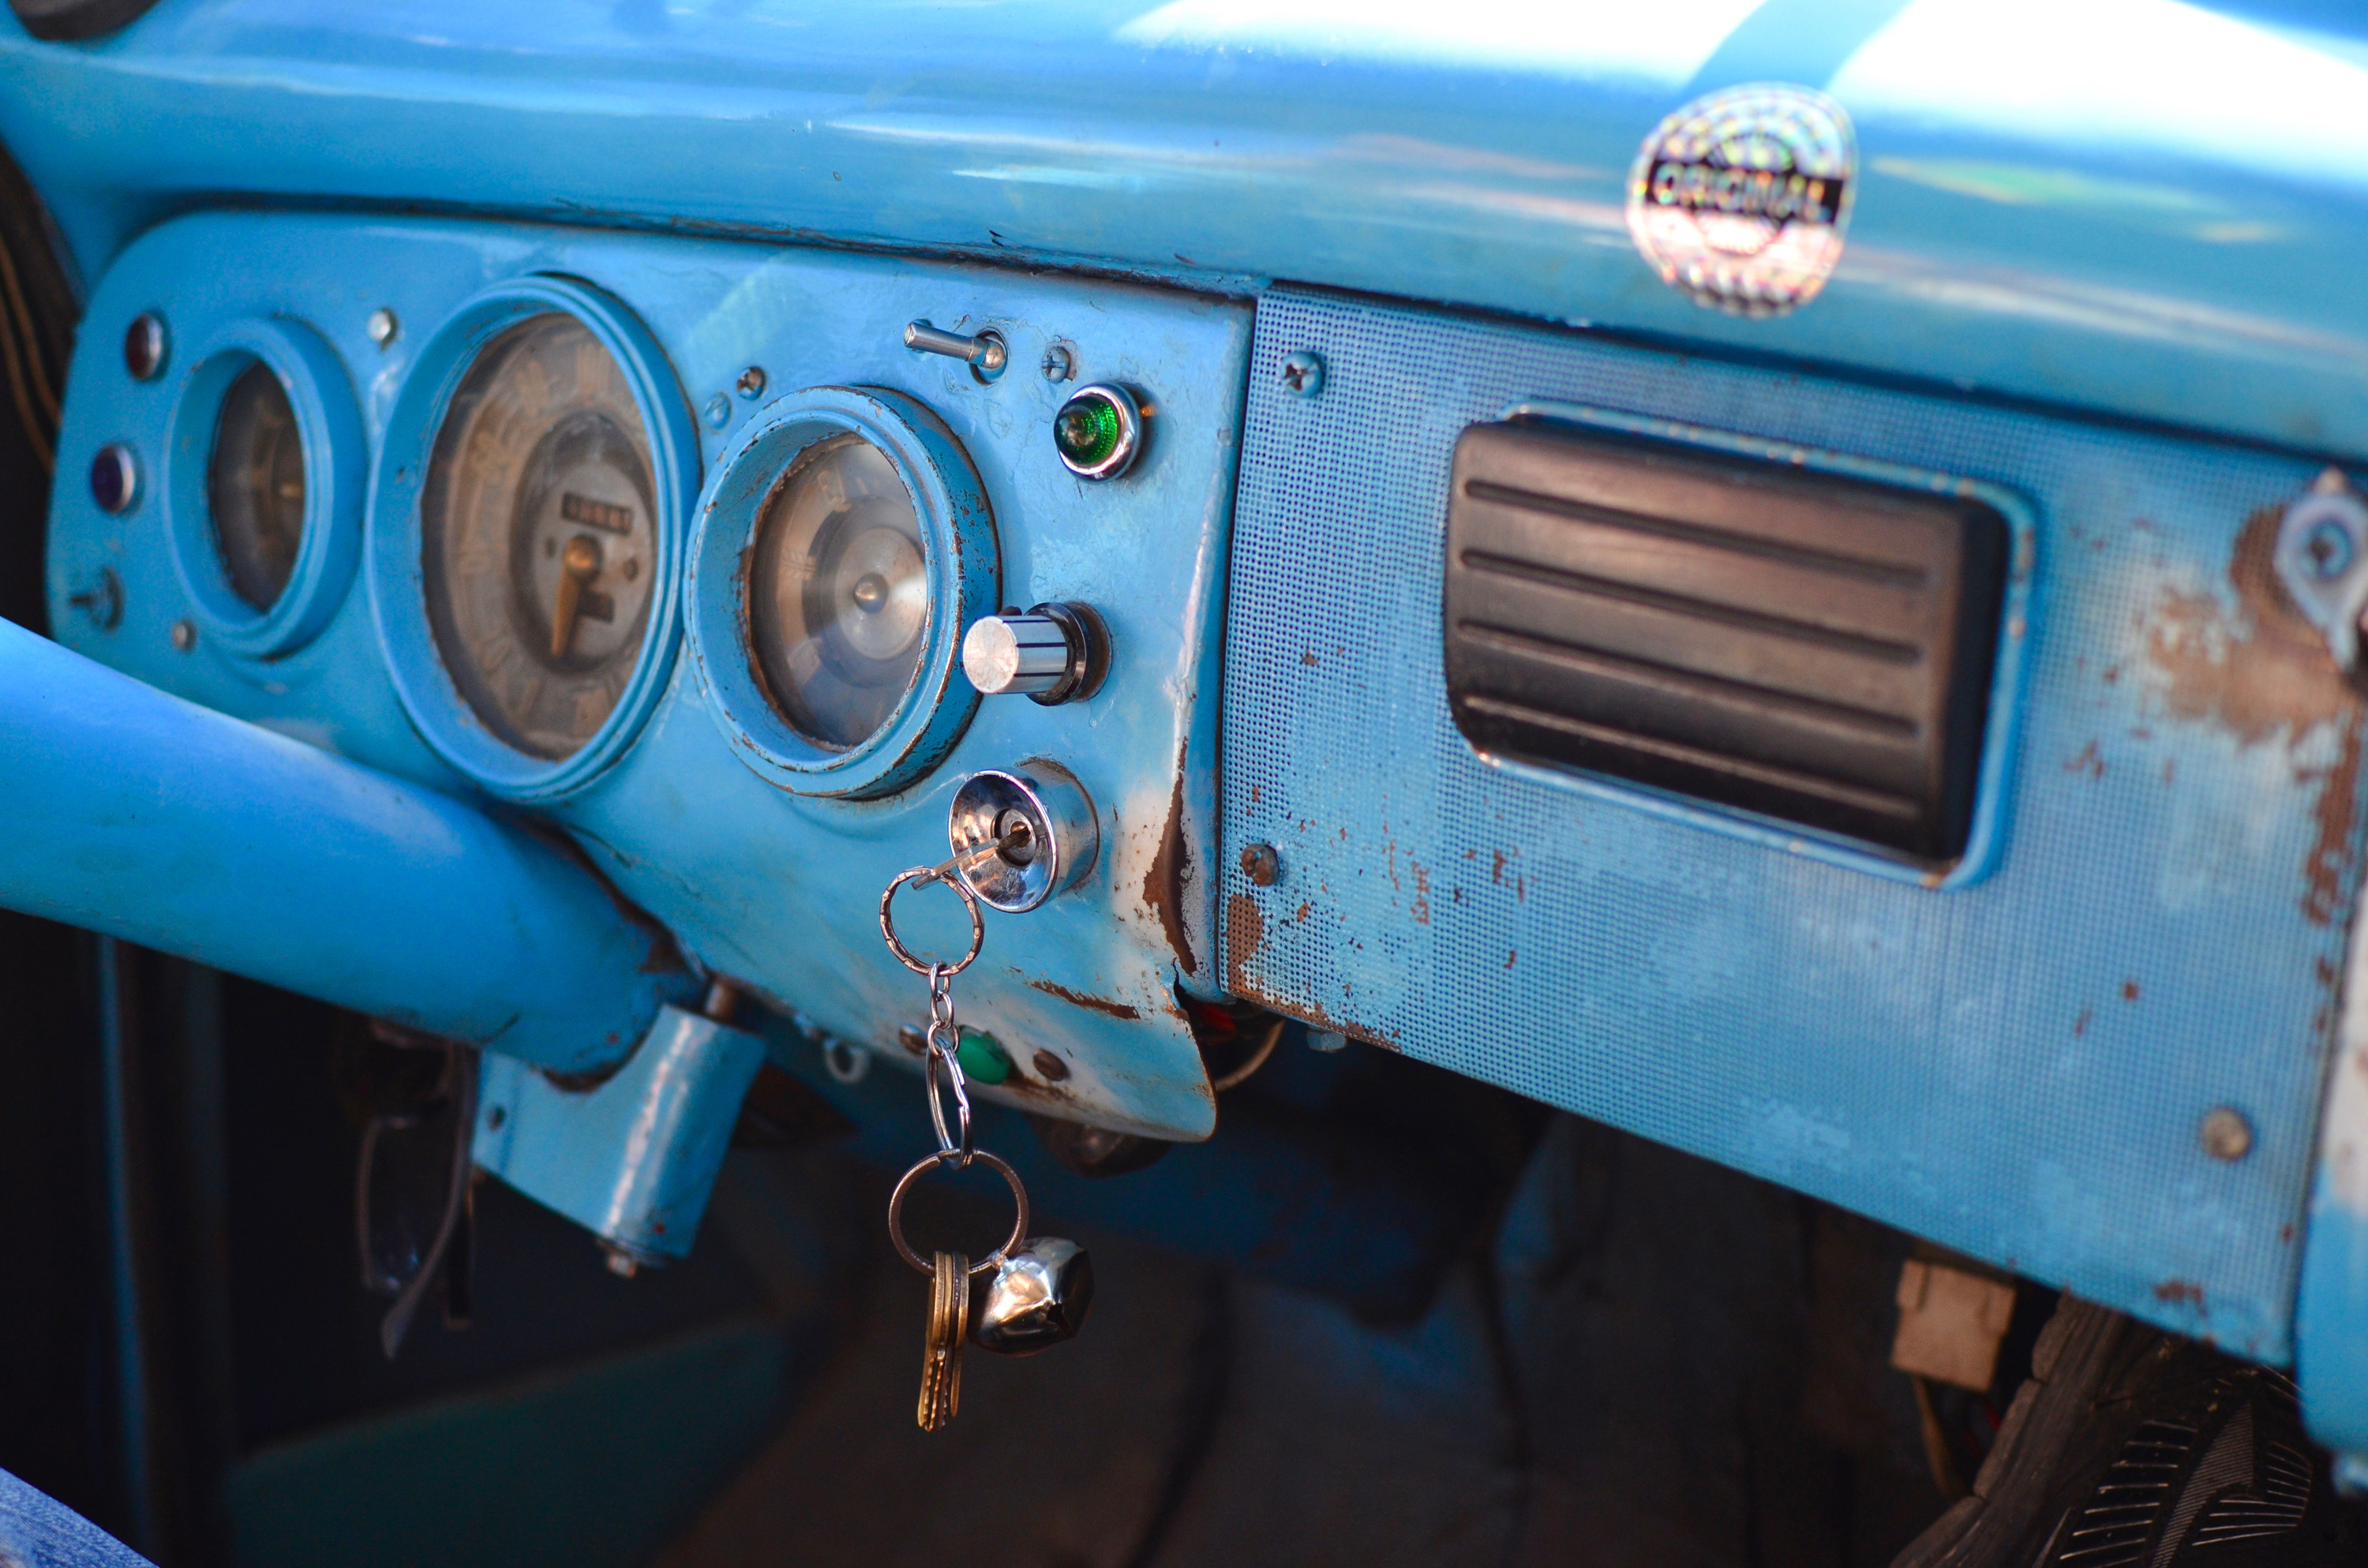 The interior dashboard area of a vintage 1950s car in Cuba featuring jerry-rigged non-original equipment